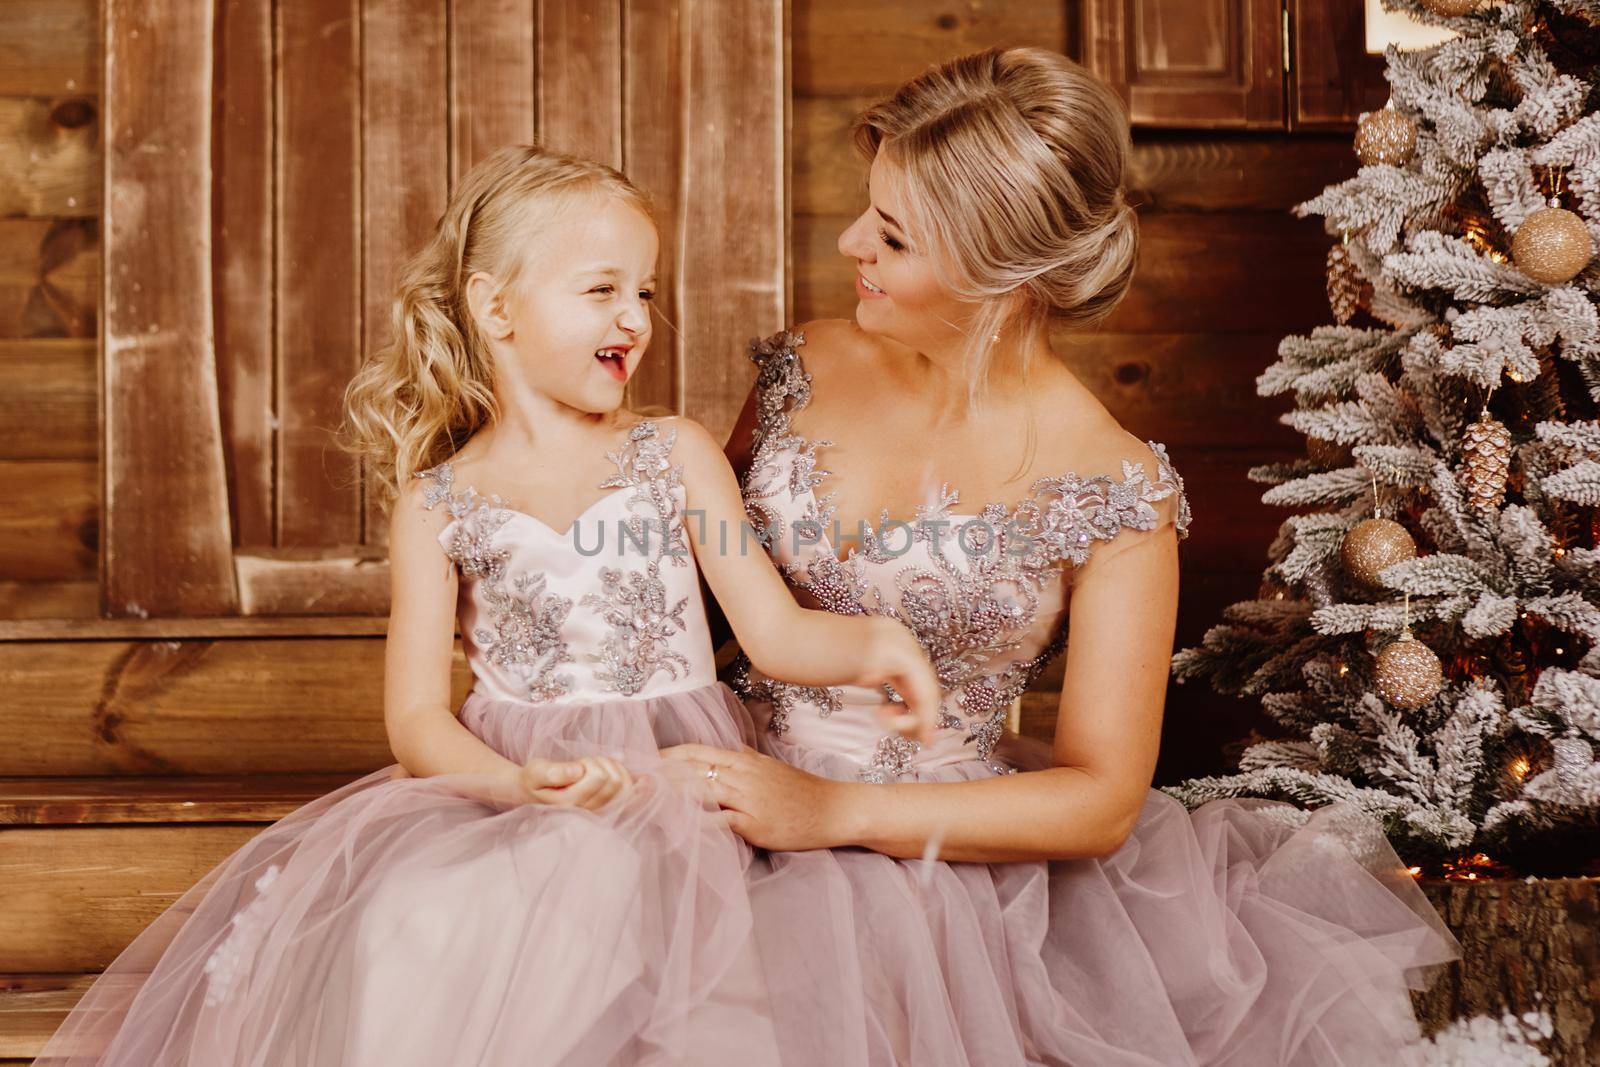 Happy Mother and her daughter in pink dresses near the Christmas decorations